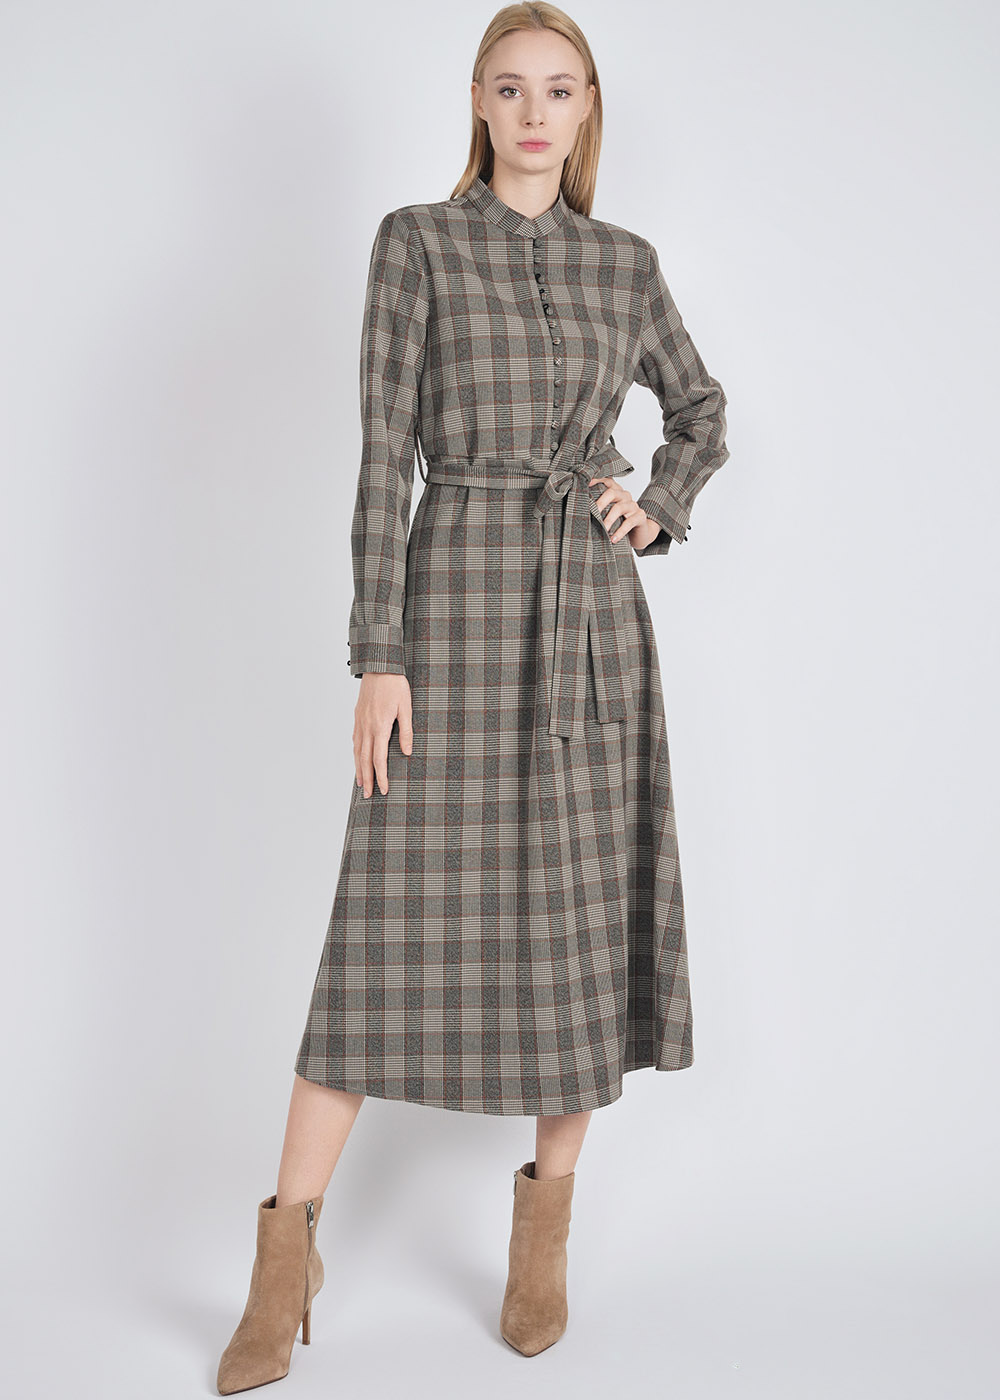 Checkered Charm: Brown Dress with Belt